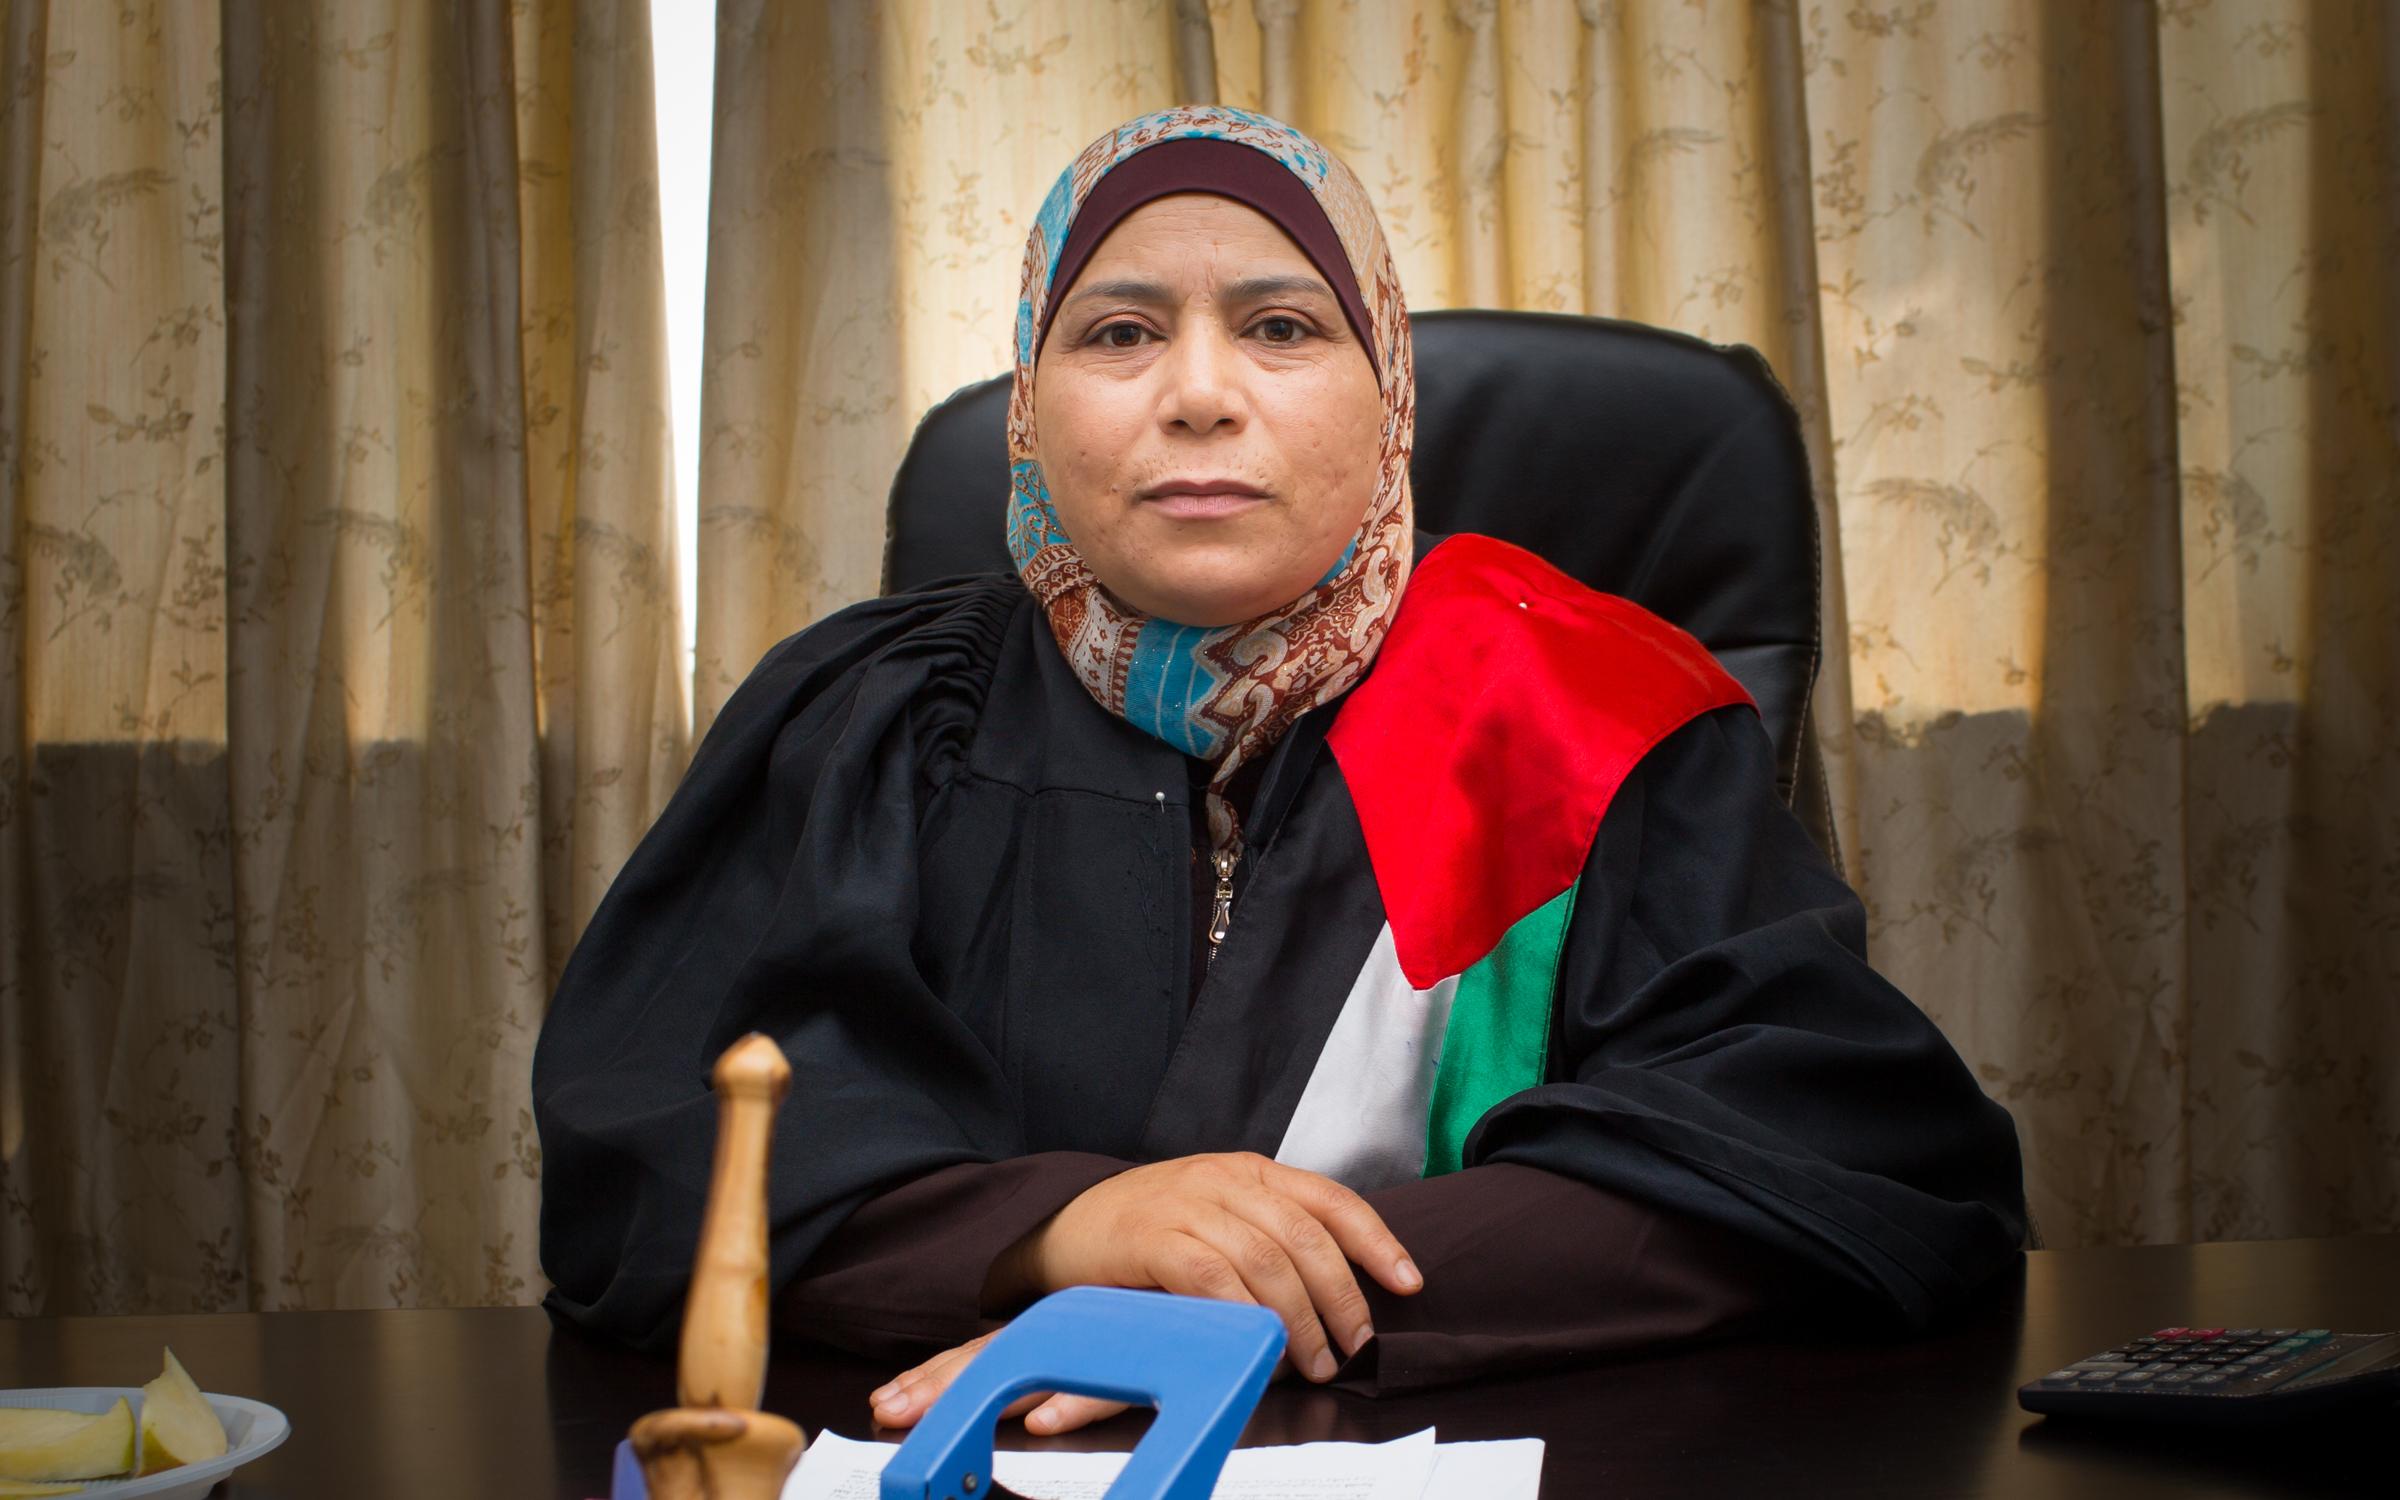  Kholoud Al-Faqih, in The Judge the first woman judge appointed to the Middle East’s Shari’a courts